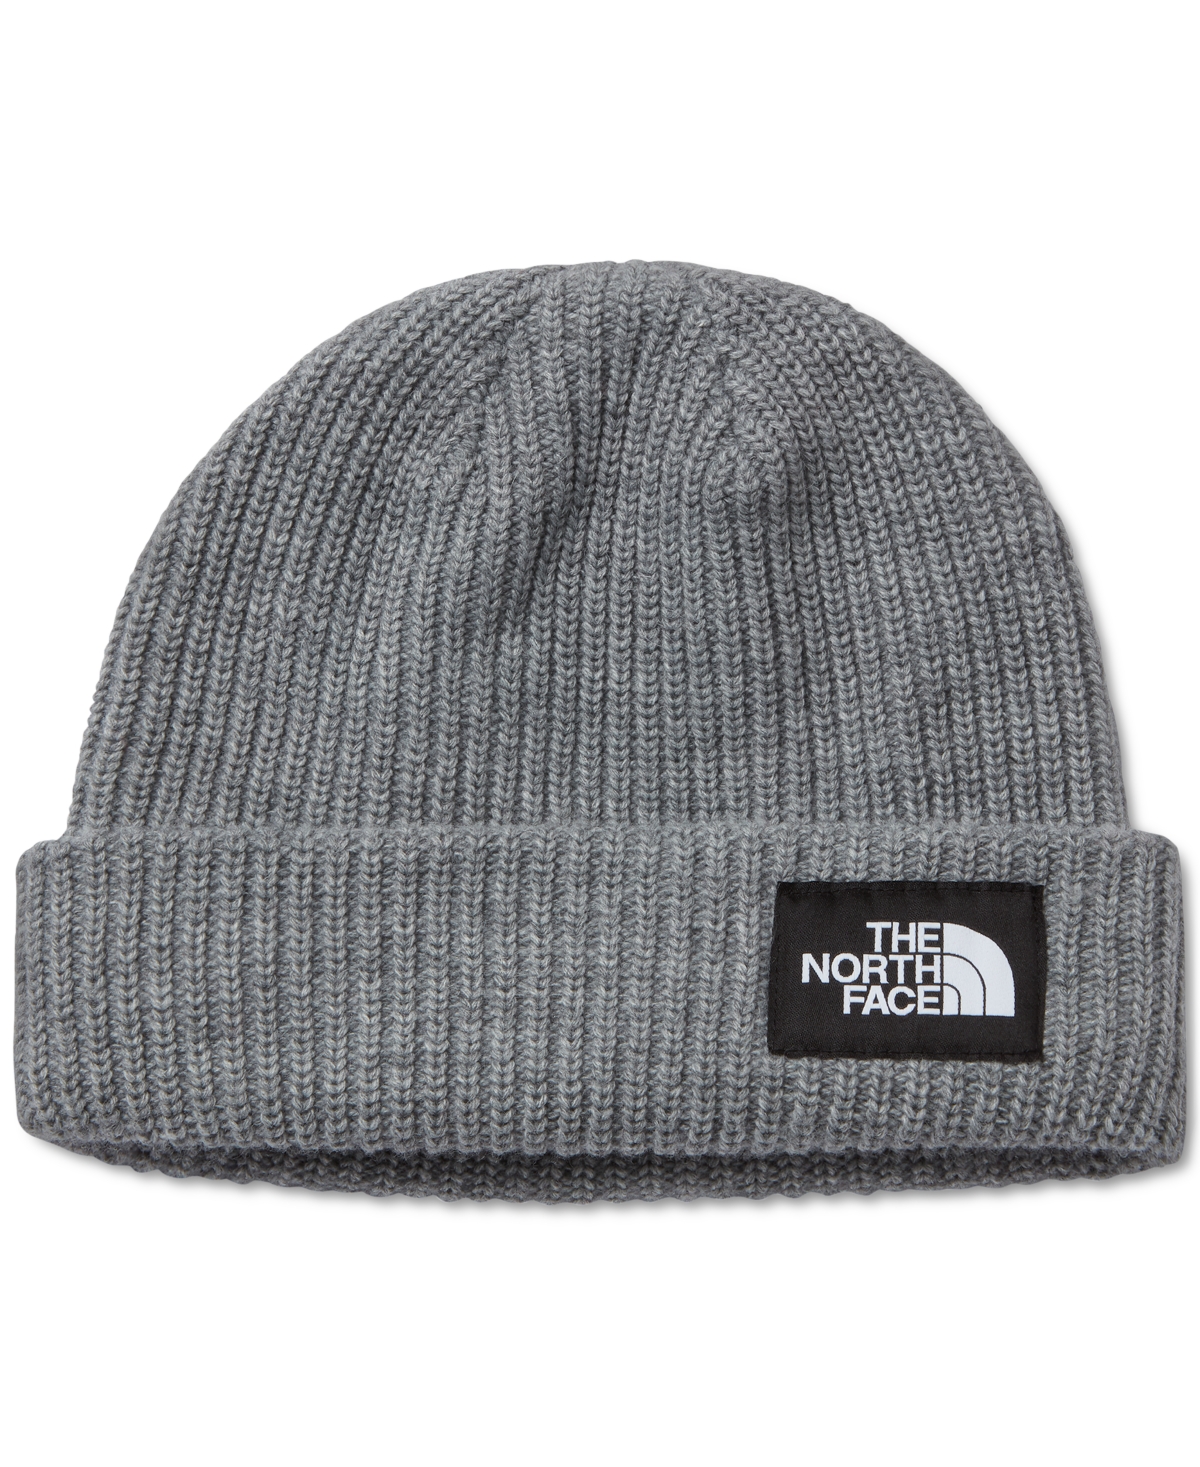 The North Face Men's Salty Lined Beanie In Tnf Light Grey Heather